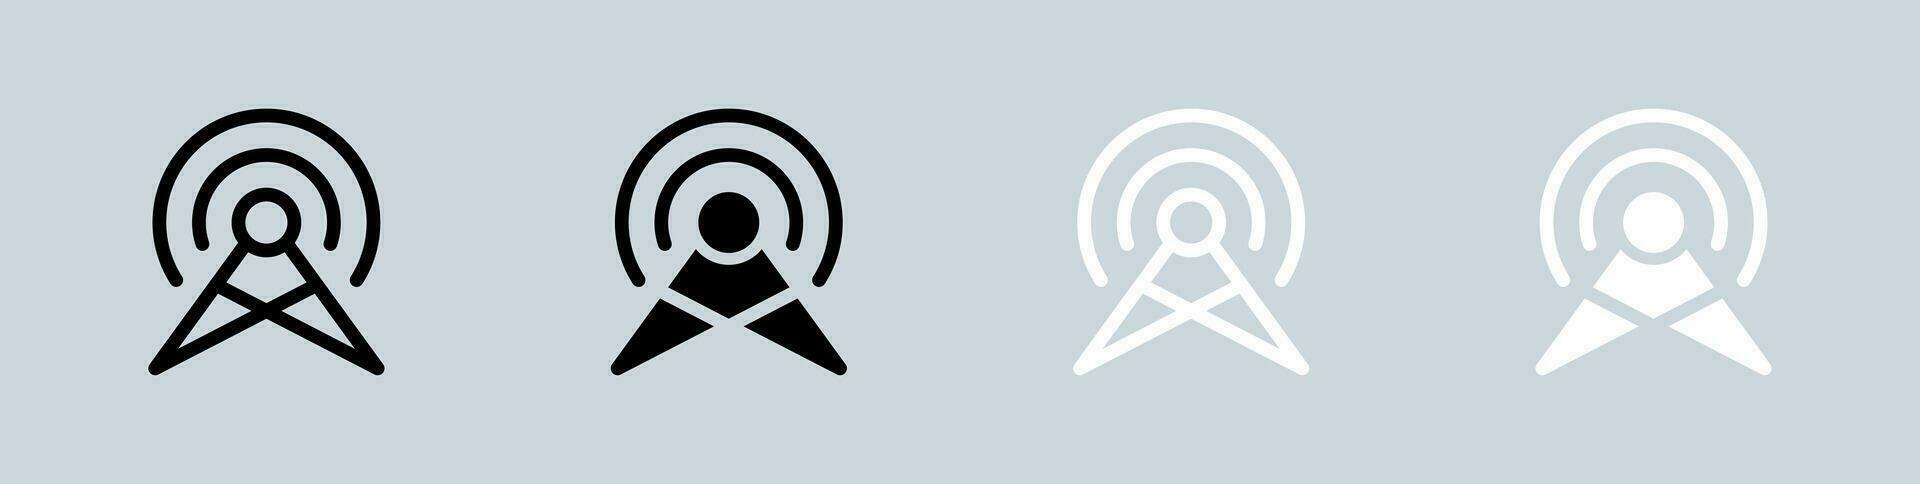 Broadcast icon set in black and white. Online signs vector illustration.